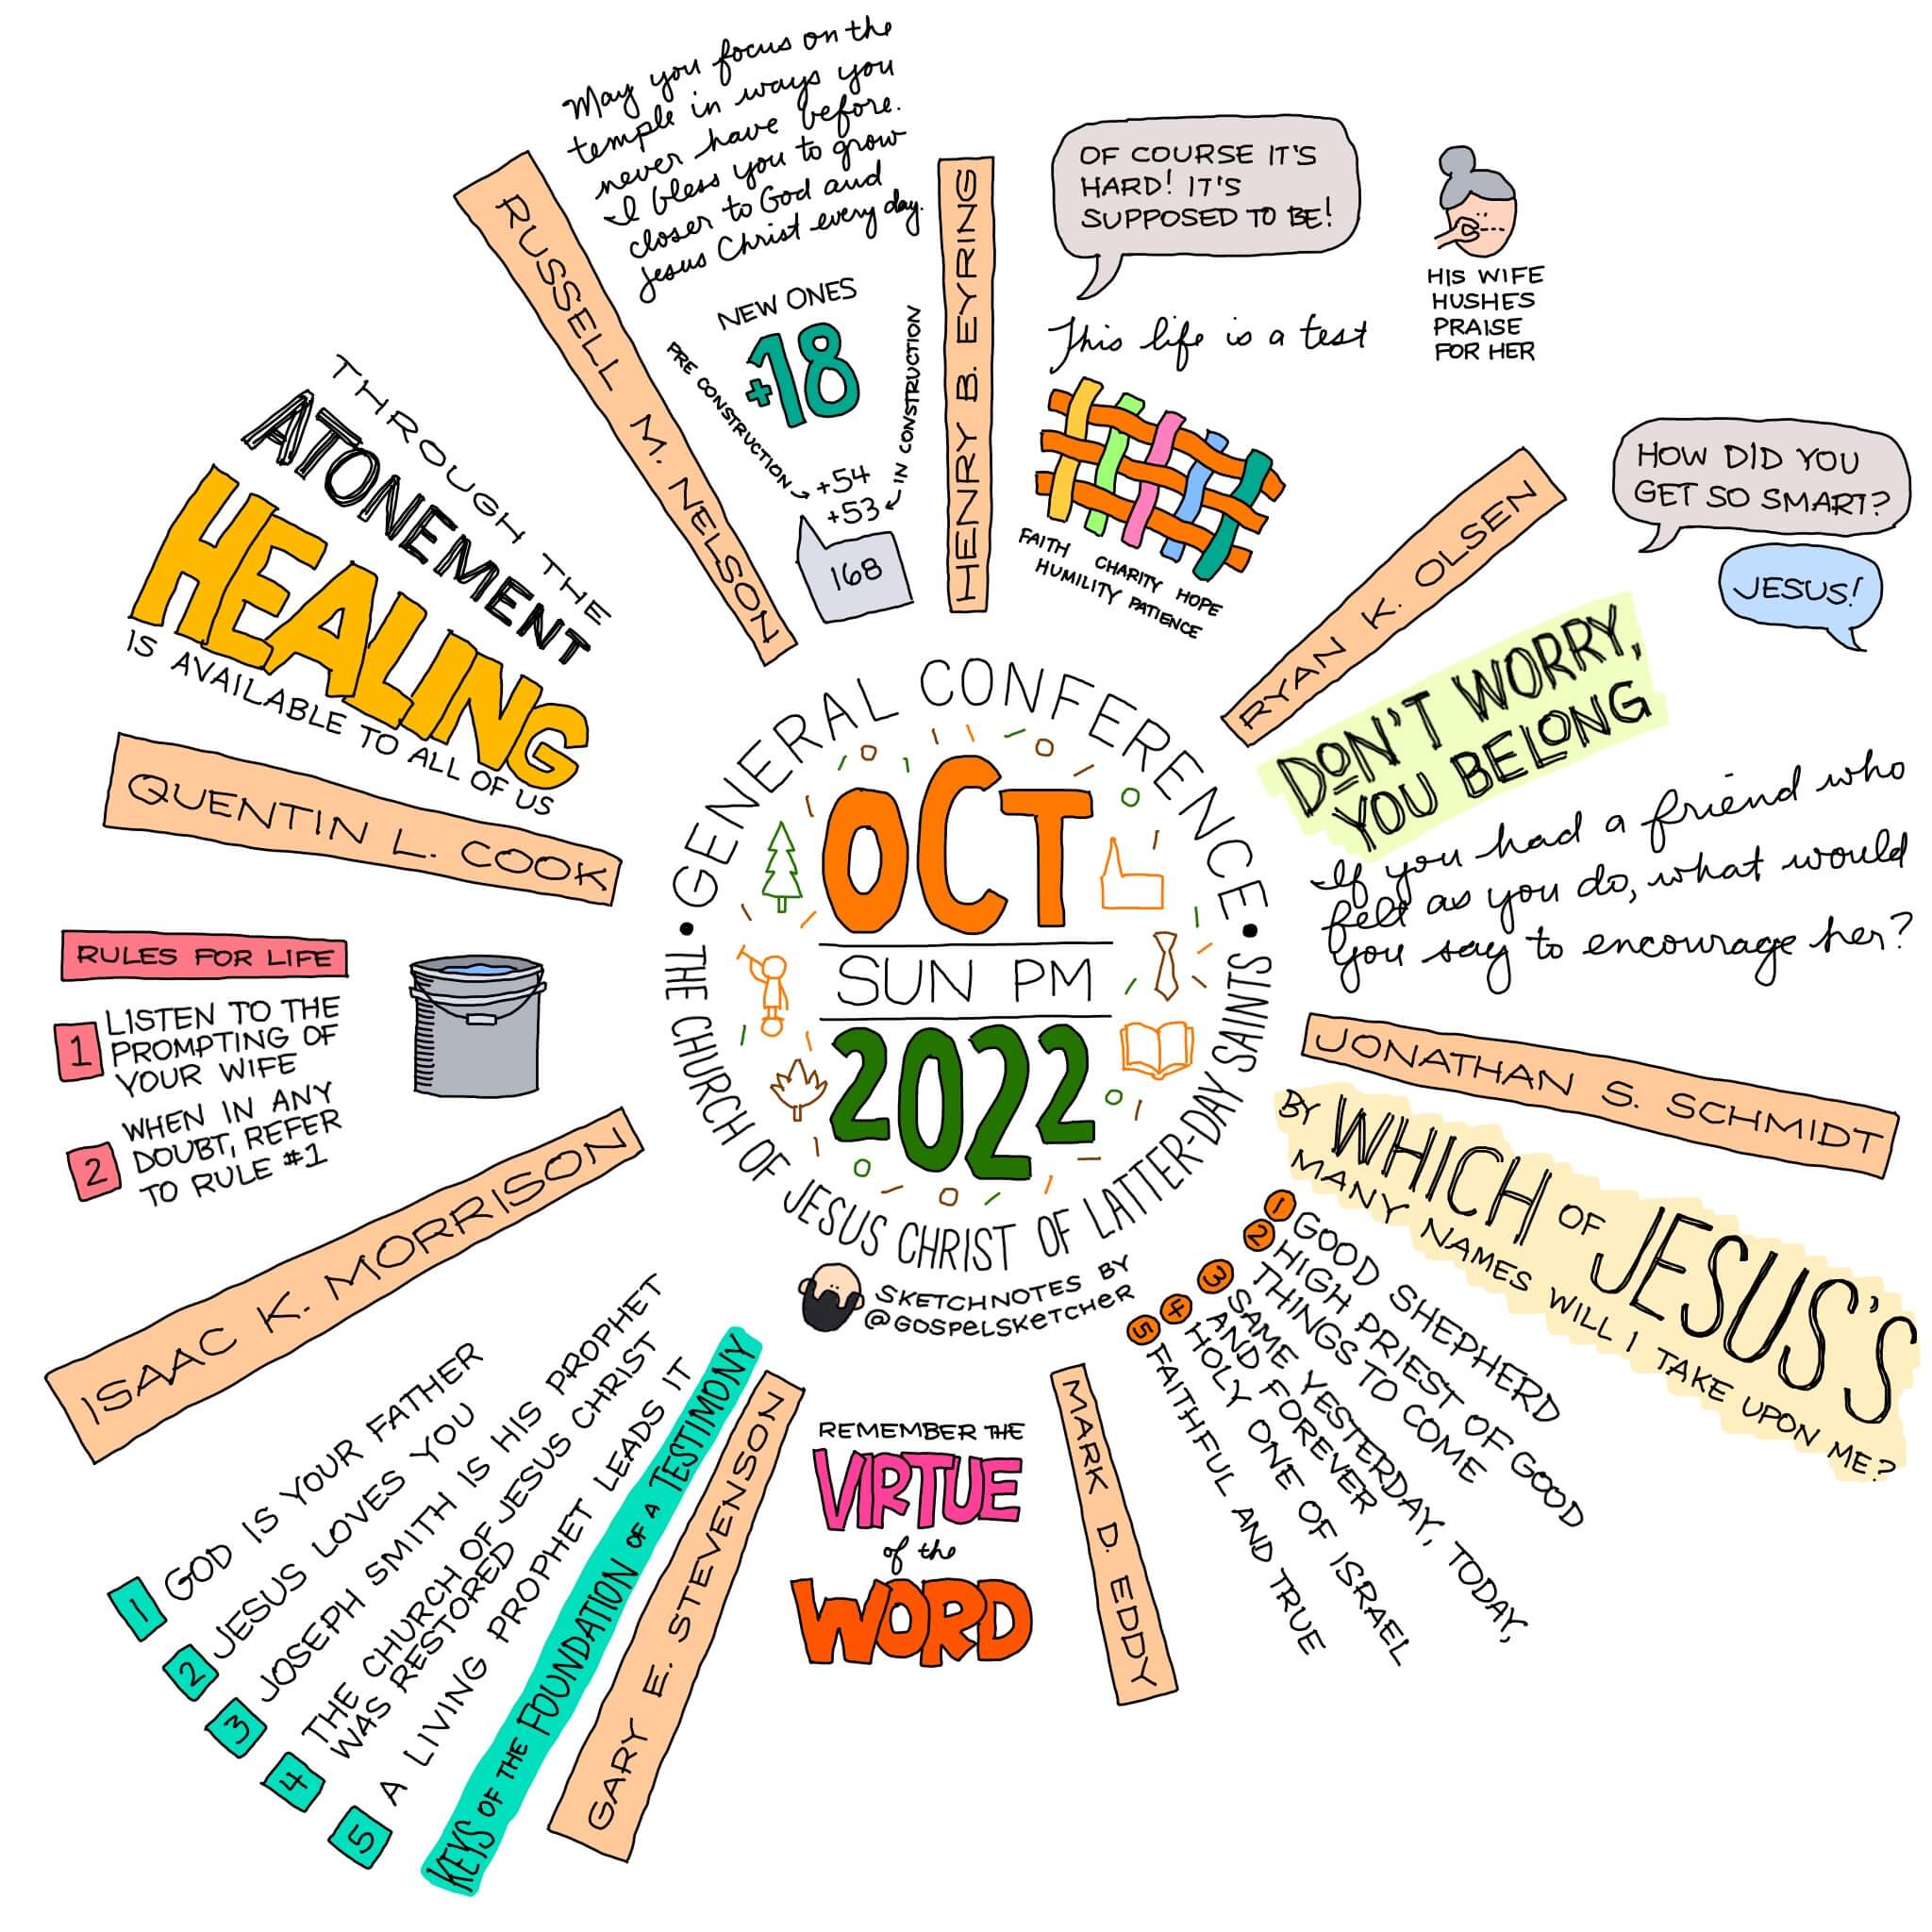 General Conference Oct 2022 Sun PM Sketchnotes